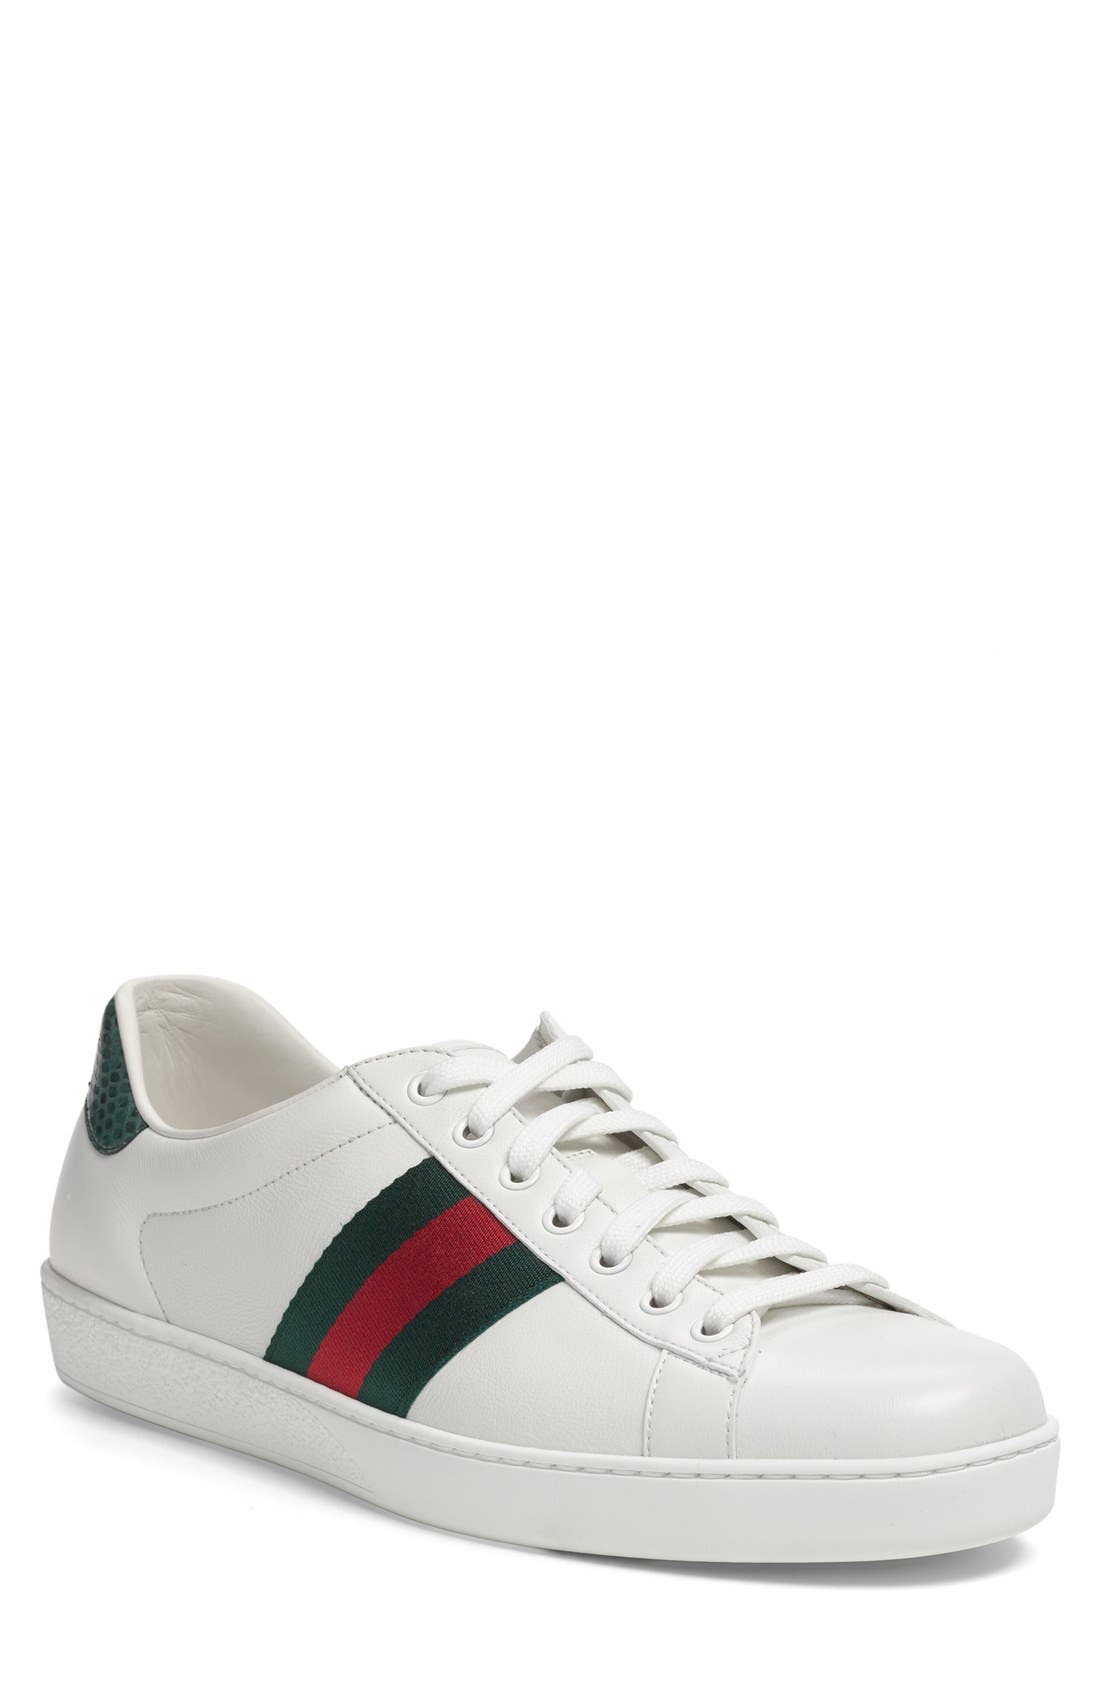 nordstrom gucci shoes